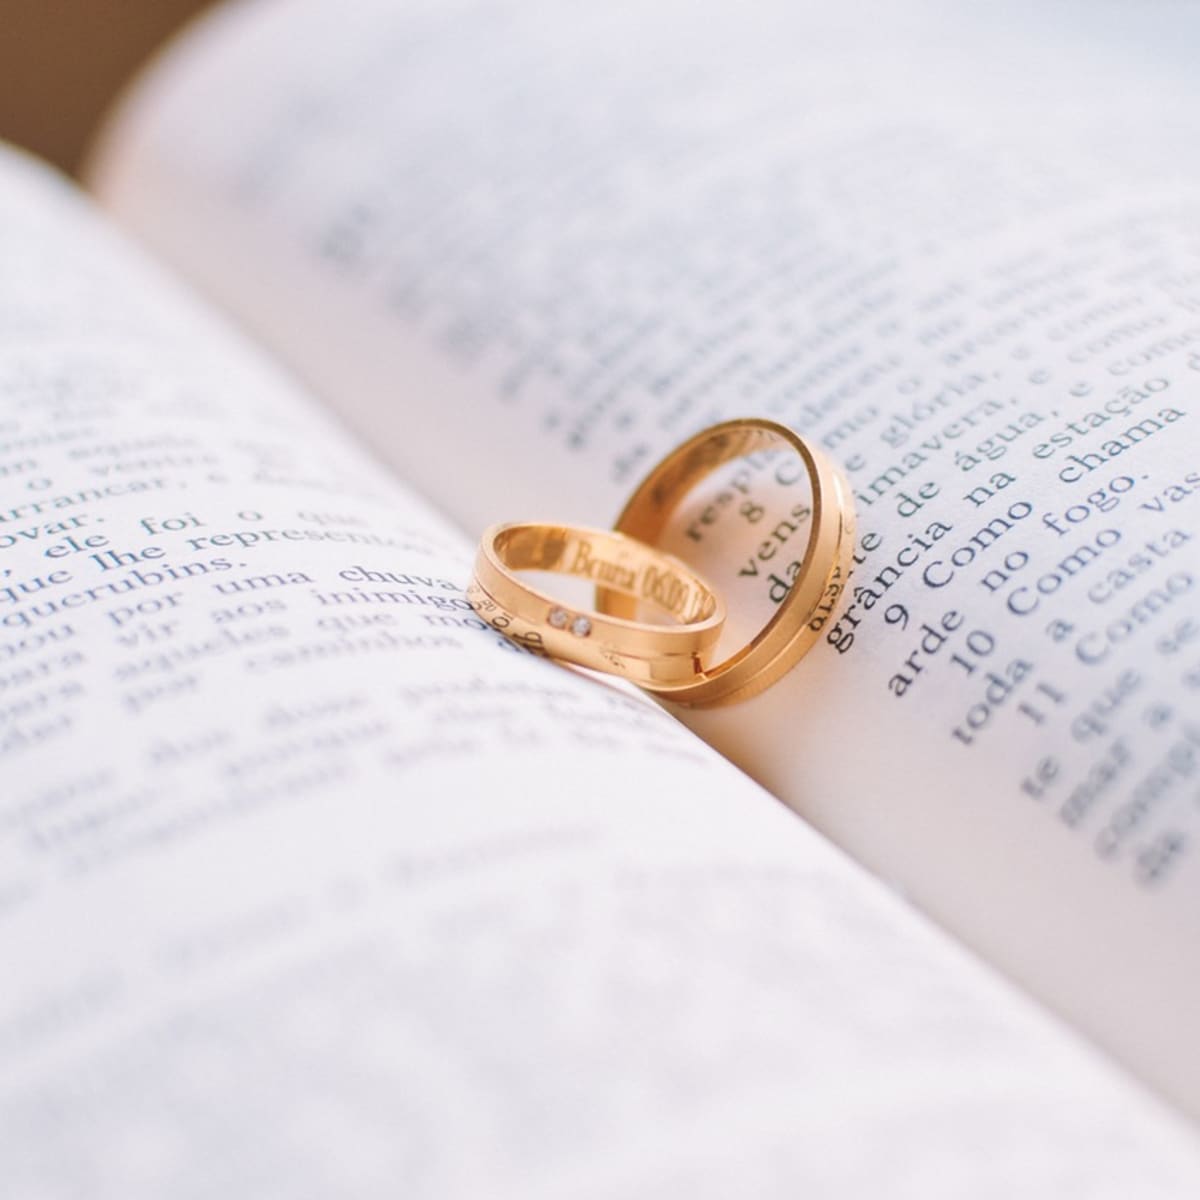 5 Best Books That Helped Save My Christian Marriage Pairedlife